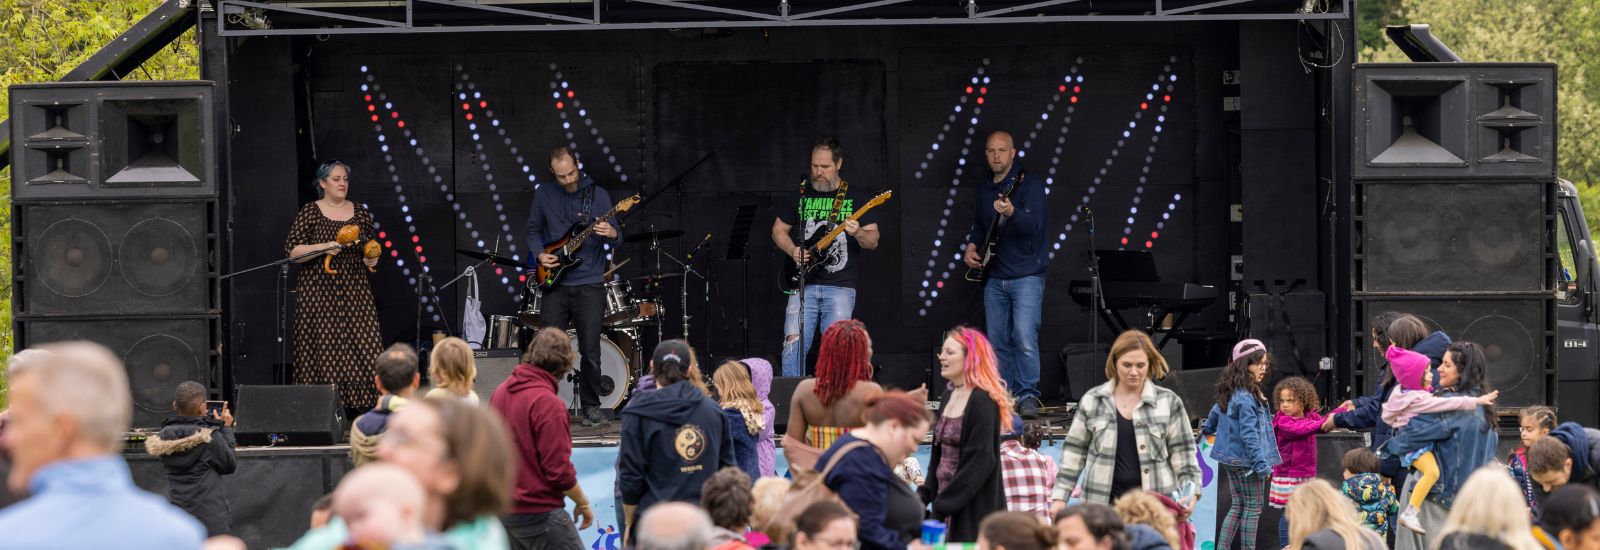 A band performing at the Community Festival while a crowd watches